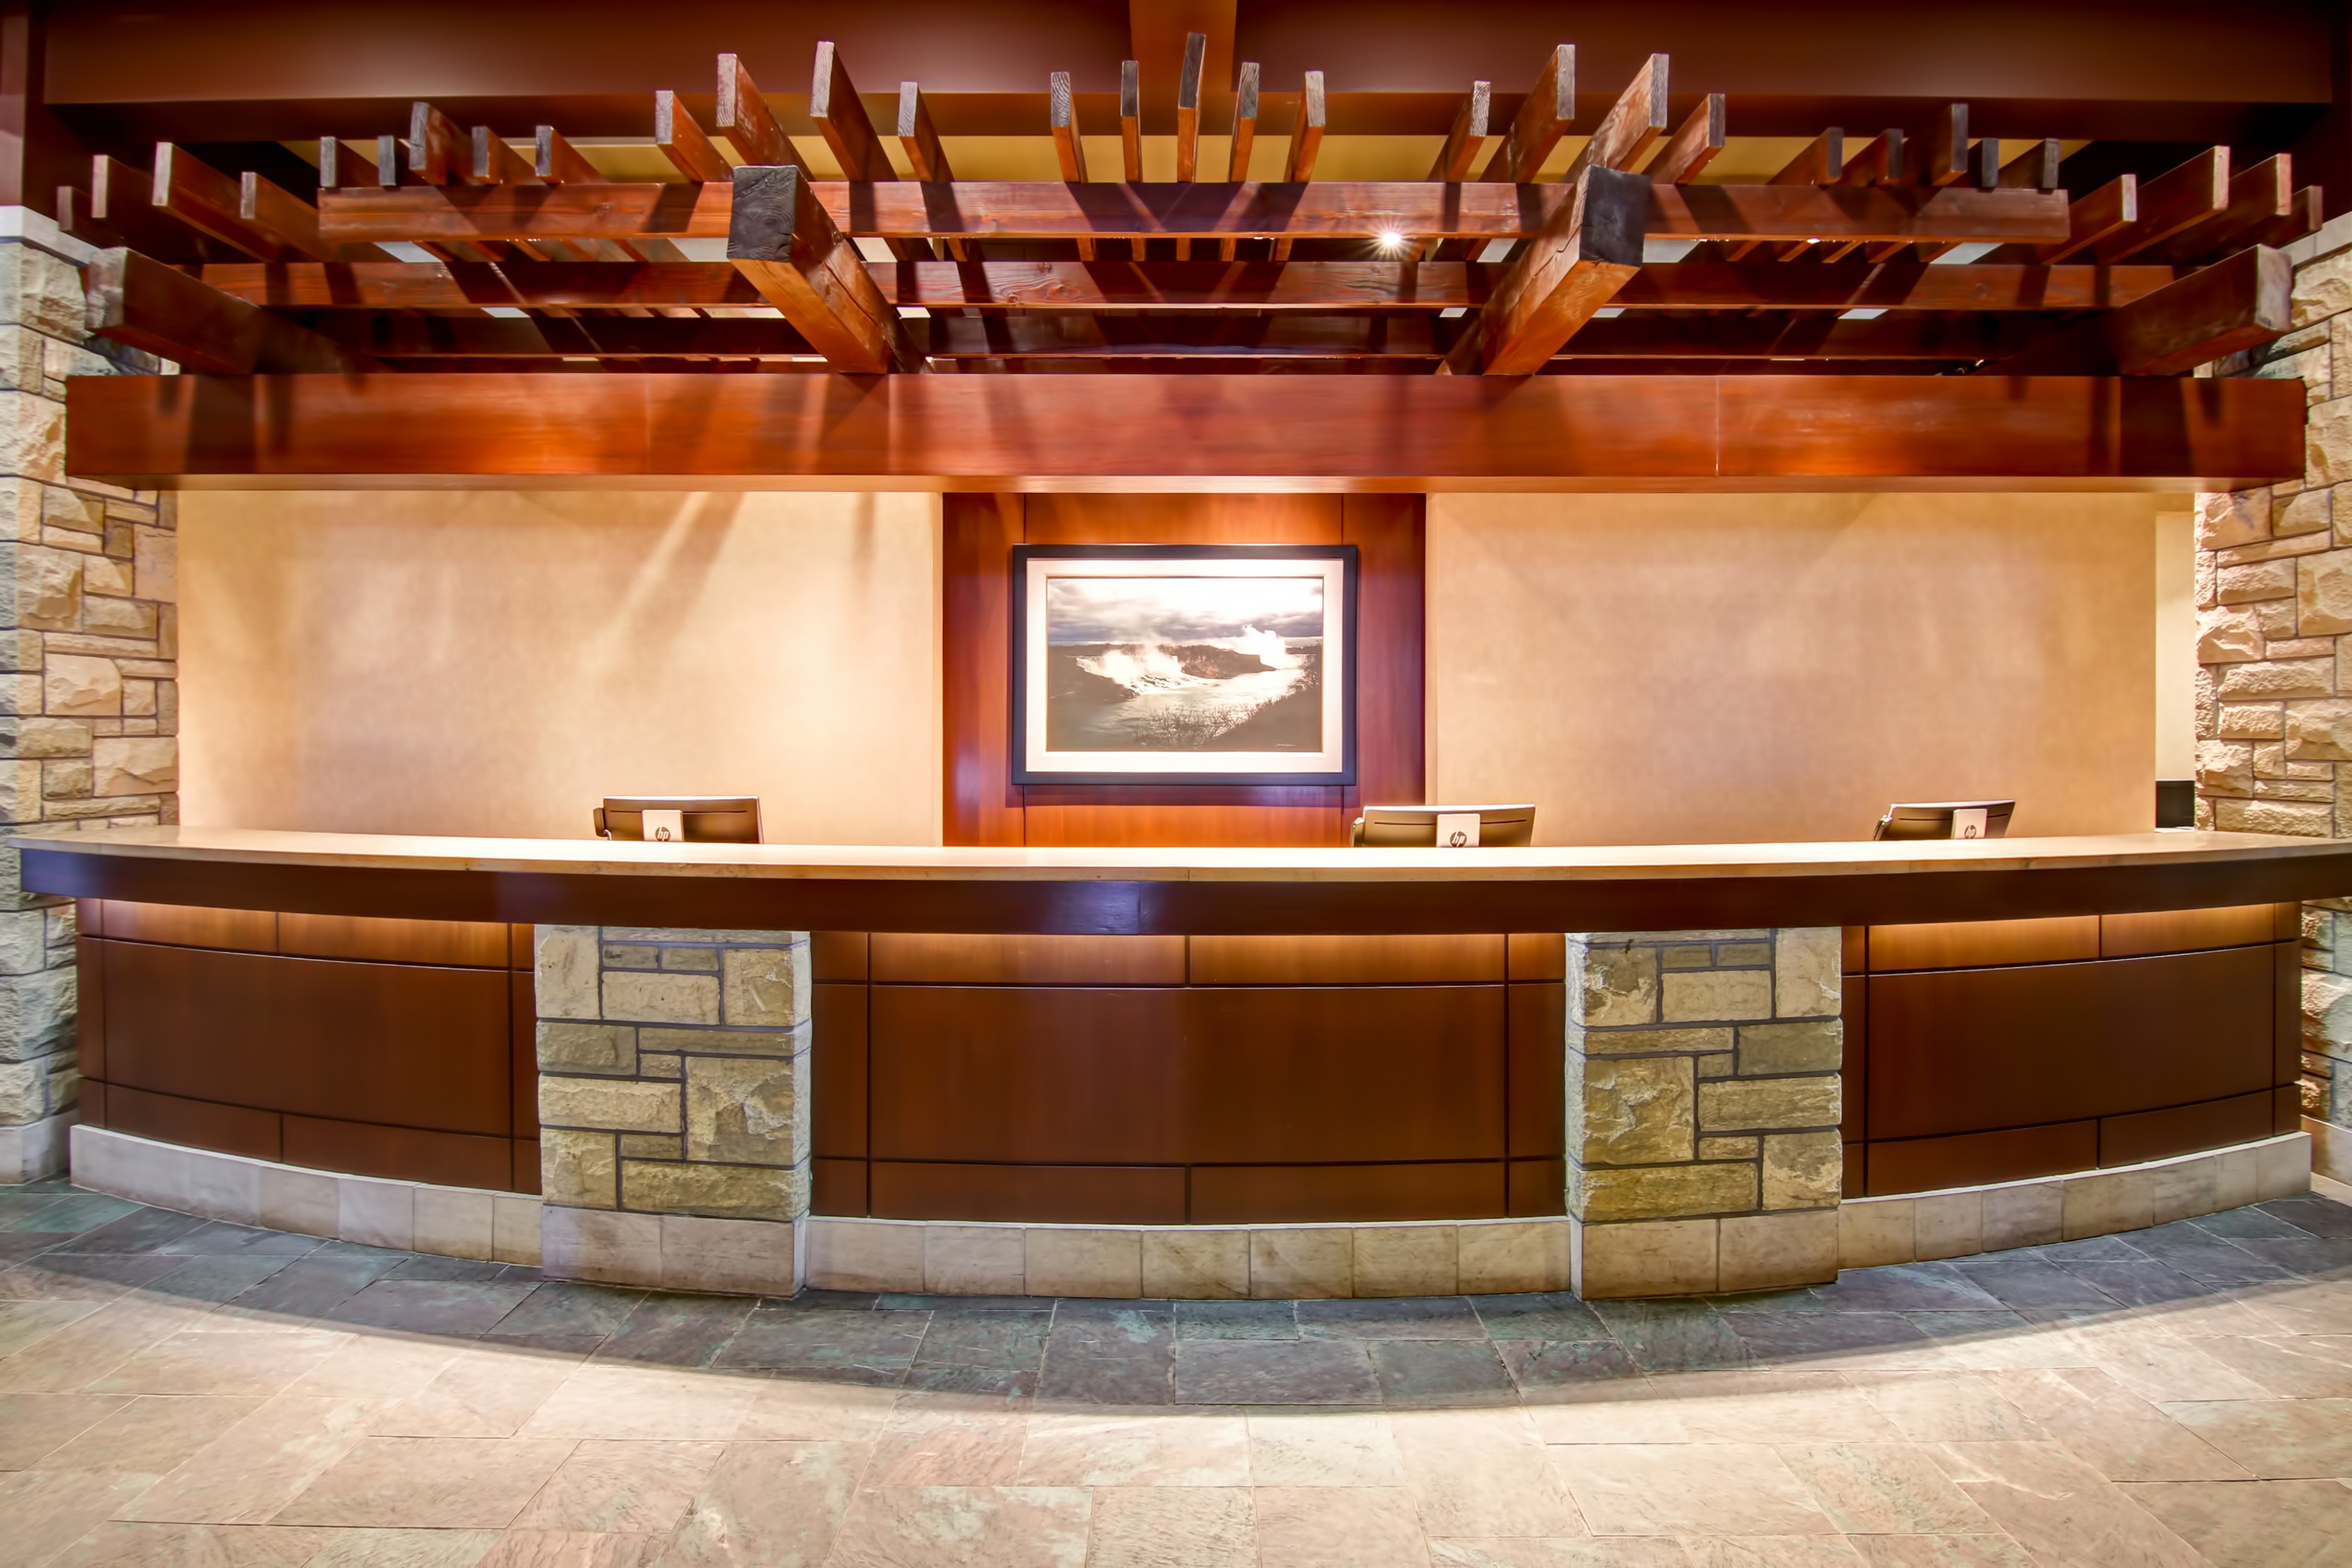 Hotel front desk with art displayed on the wall behind counter